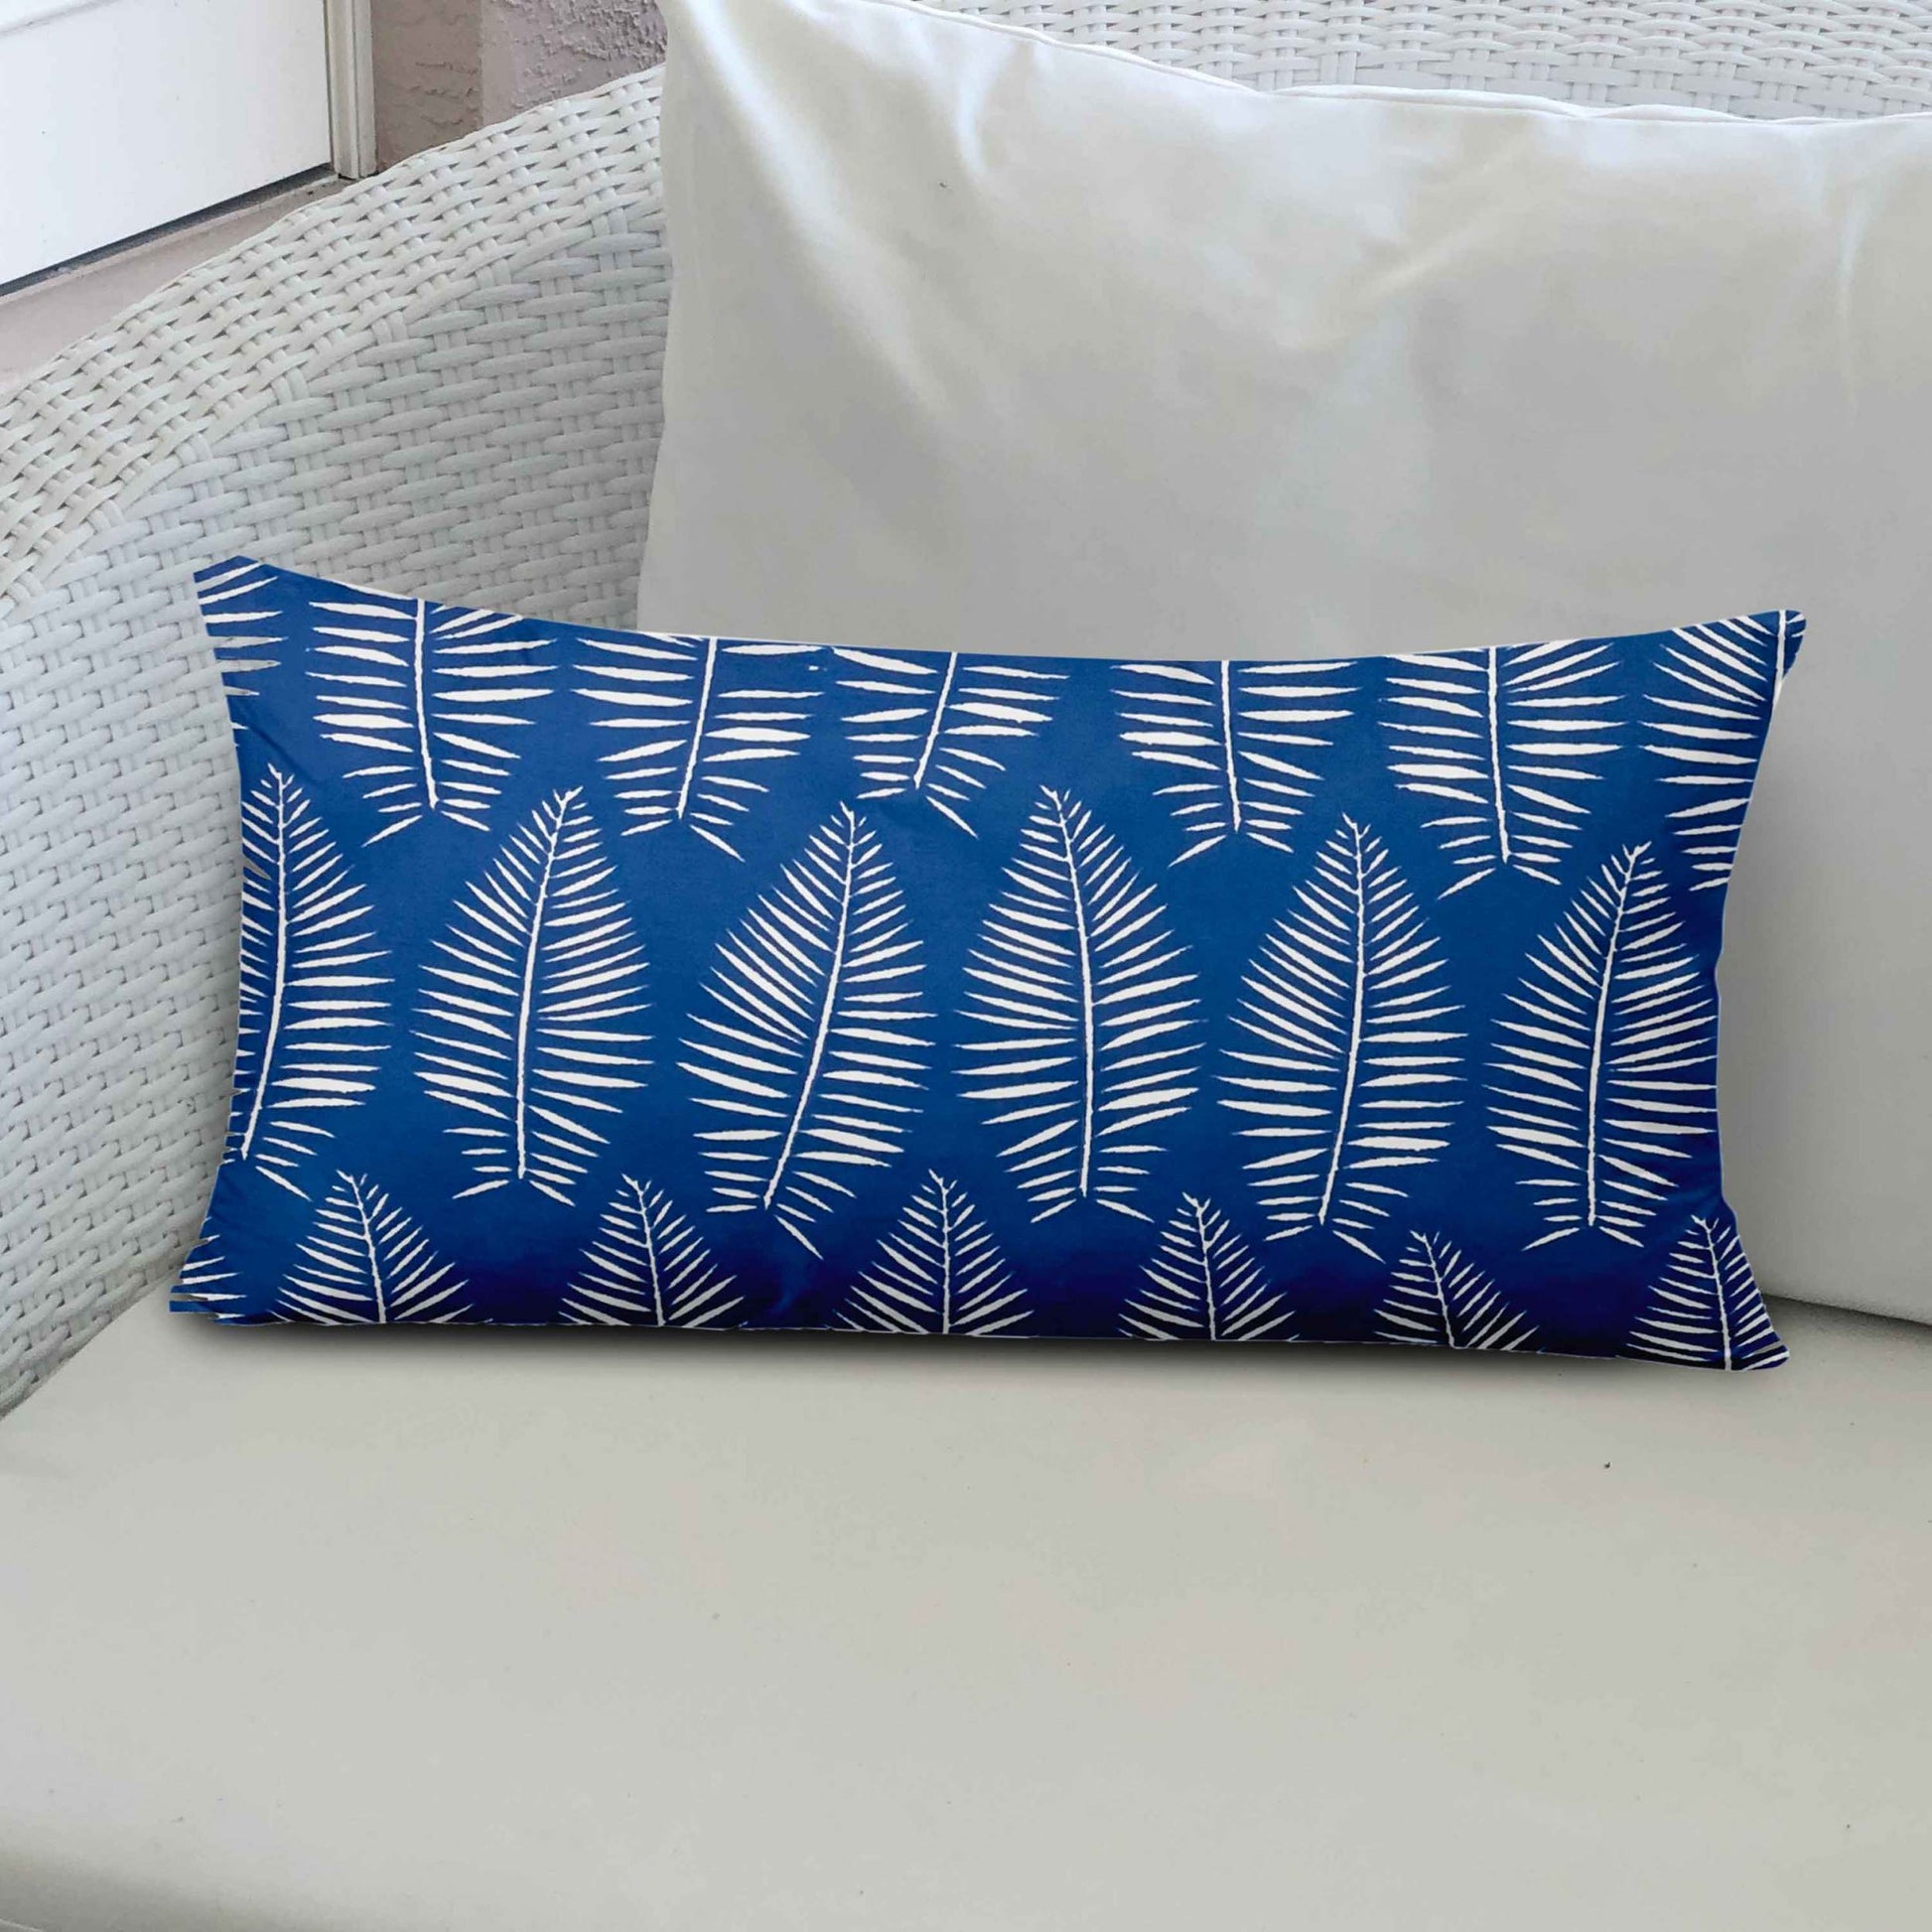 BREEZY Indoor Outdoor Soft Royal Pillow, Zipper Cover multicolor-polyester